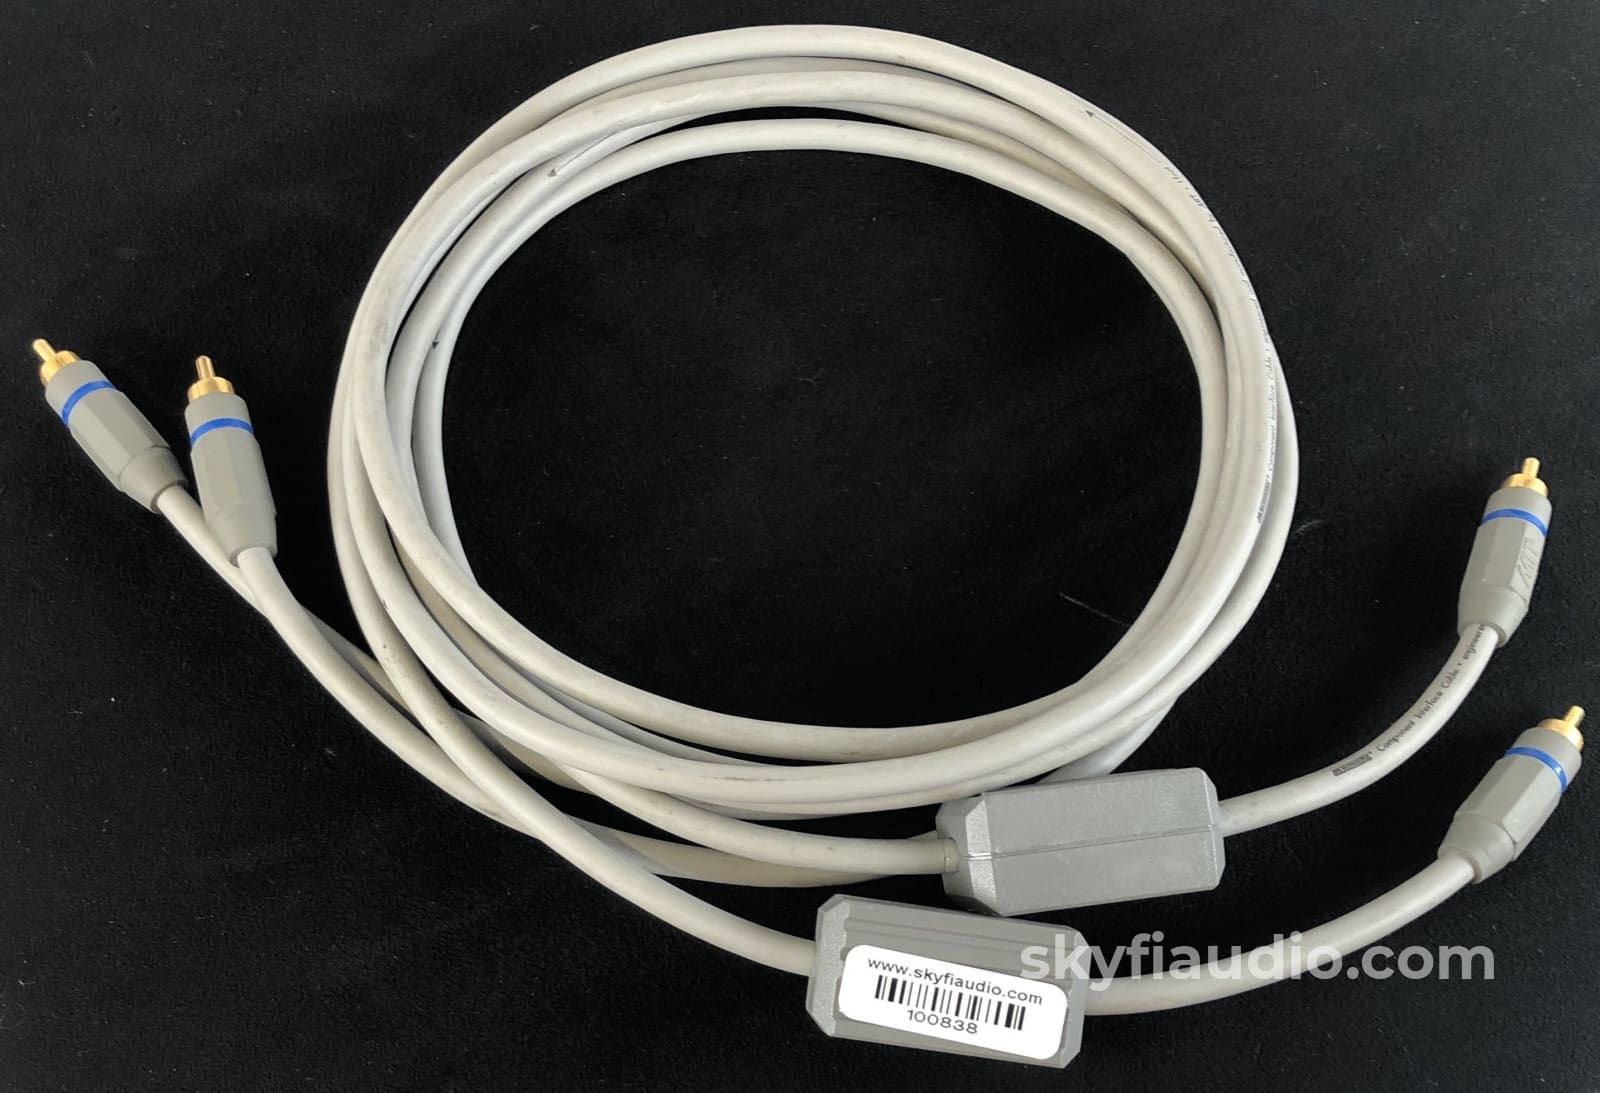 Mit (Music Interface Technologies) Terminator 6 Rca Cable - 2 Meter Cables